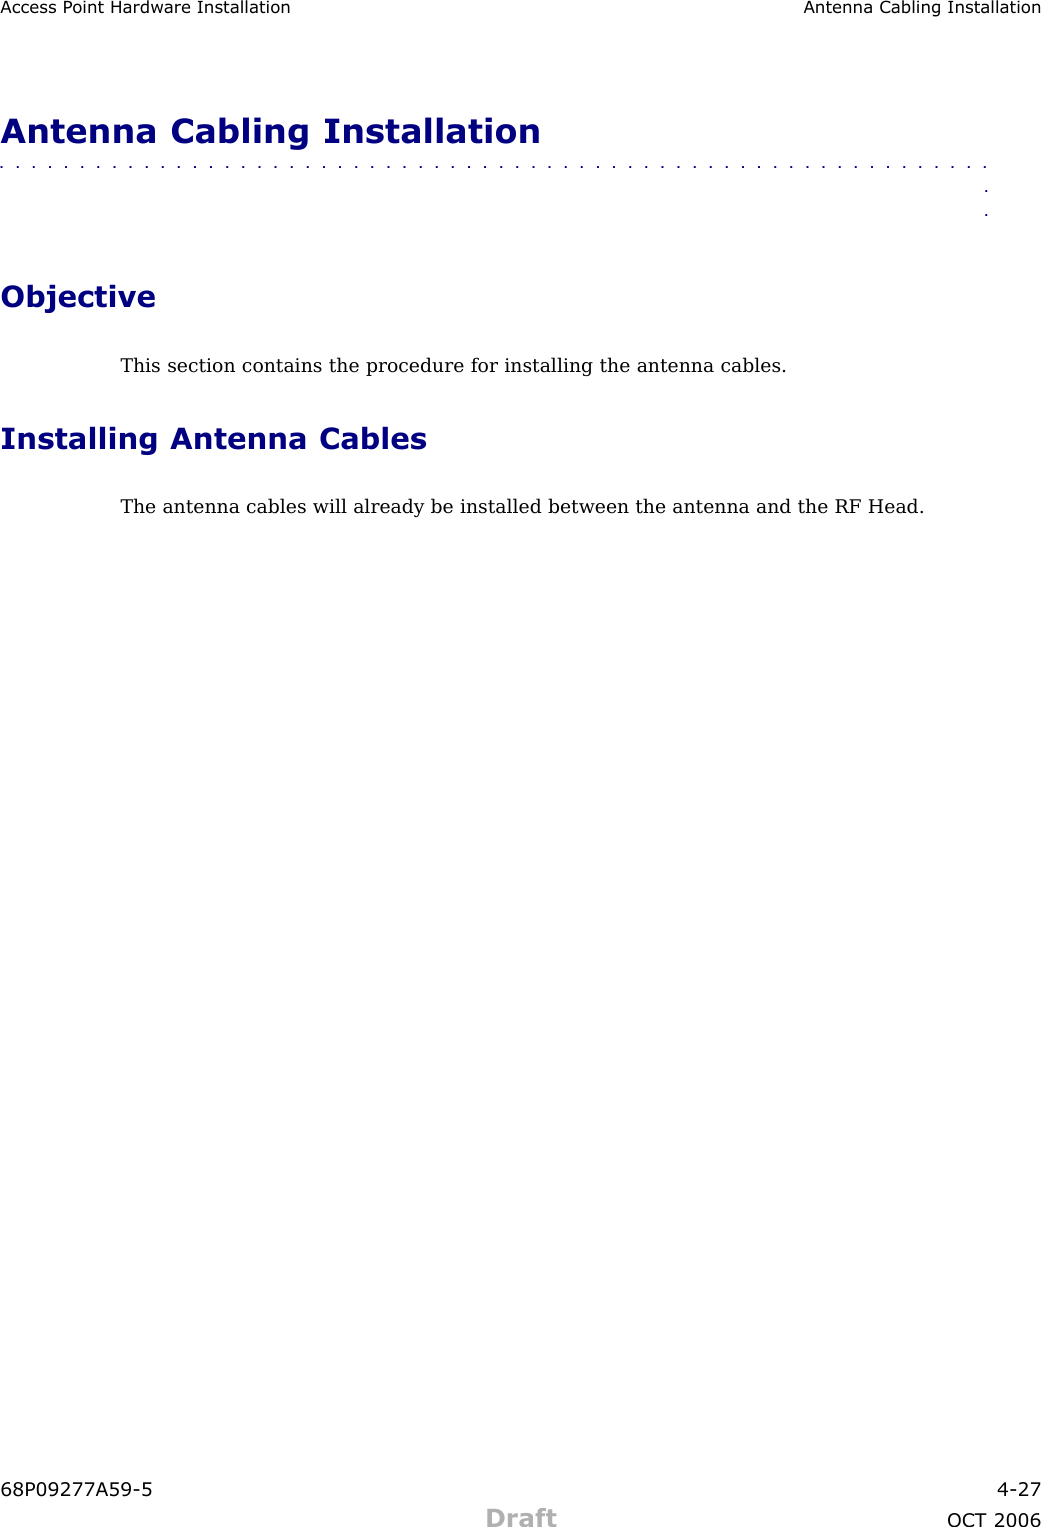 Access P oint Hardw are Installation Antenna Cabling InstallationAntenna Cabling Installation■■■■■■■■■■■■■■■■■■■■■■■■■■■■■■■■■■■■■■■■■■■■■■■■■■■■■■■■■■■■■■■■ObjectiveThis section contains the procedure for installing the antenna cables.Installing Antenna CablesThe antenna cables will already be installed between the antenna and the RF Head.68P09277A59 -5 4 -27Draft OCT 2006